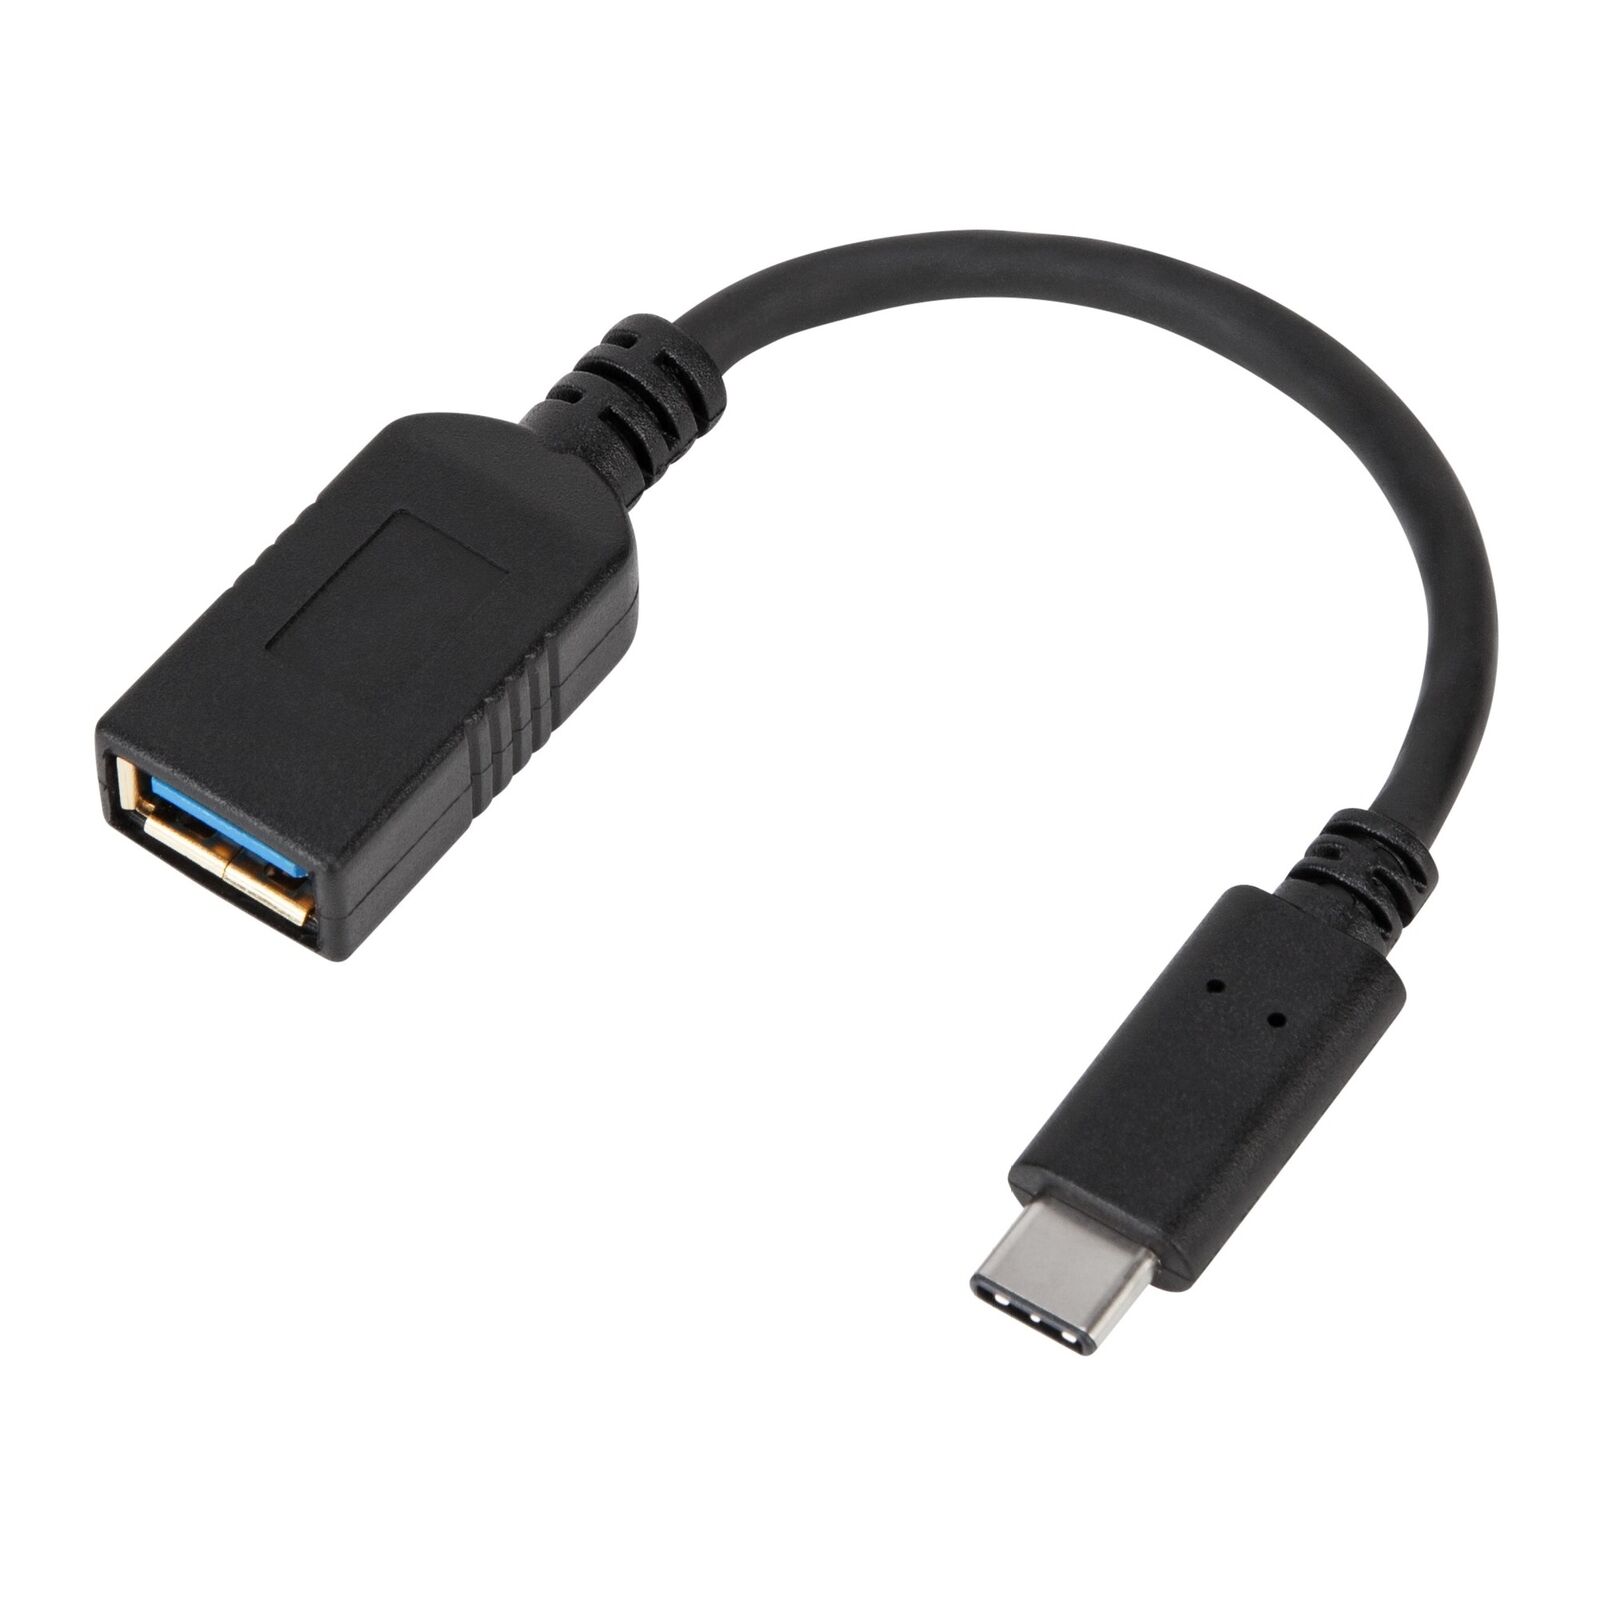 USB C - Male to USB A - Female Adapter for various Smartphones